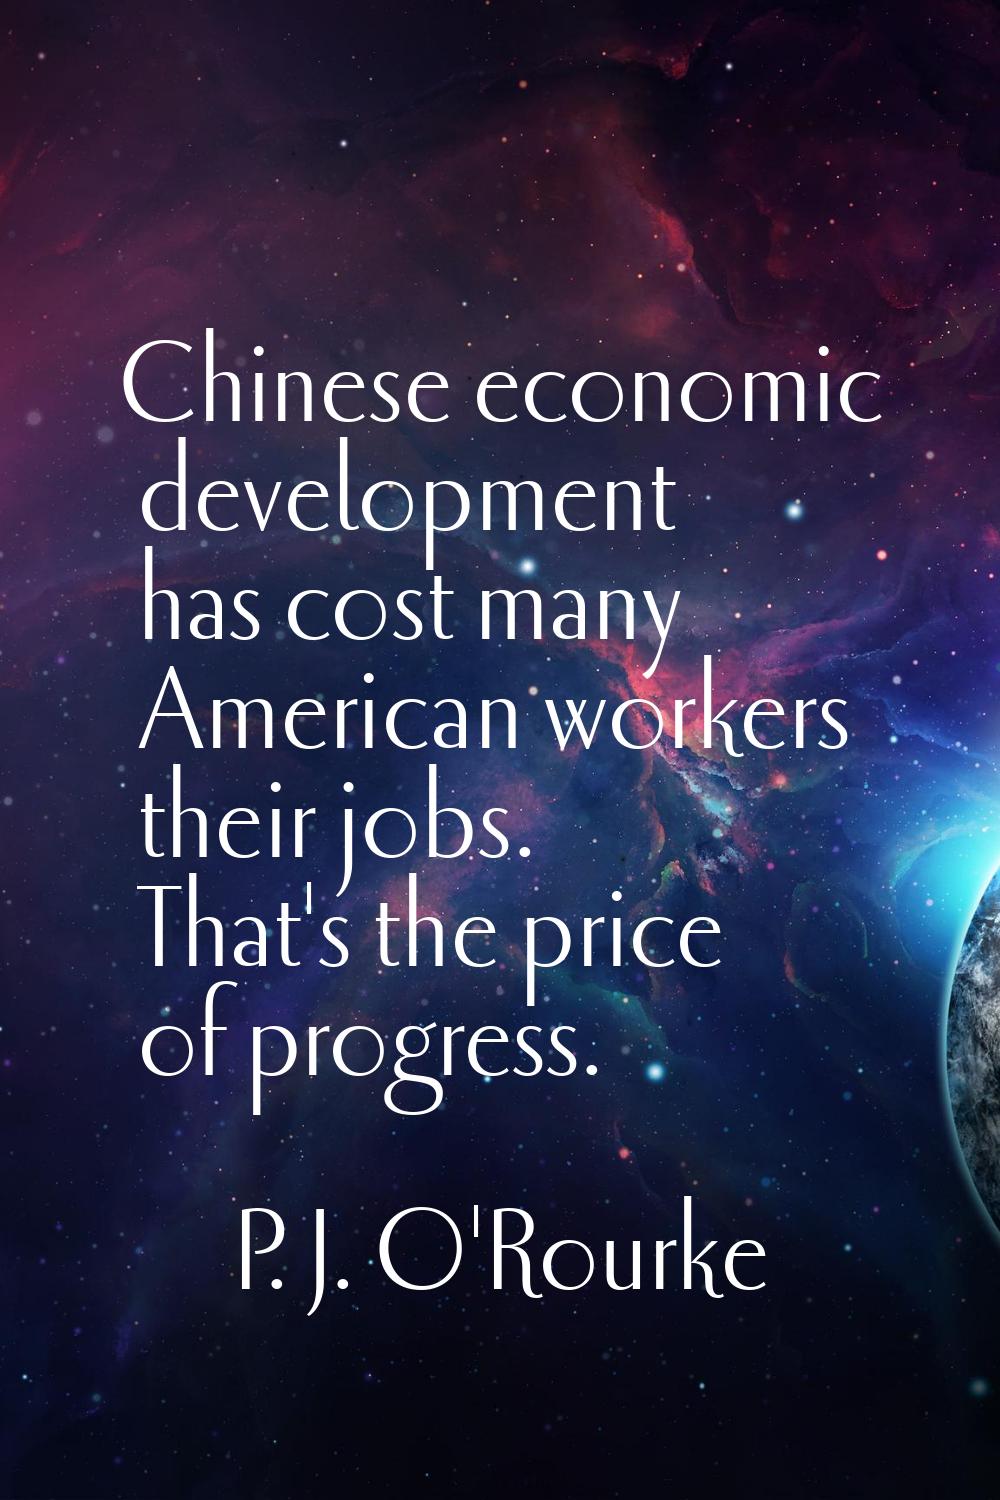 Chinese economic development has cost many American workers their jobs. That's the price of progres